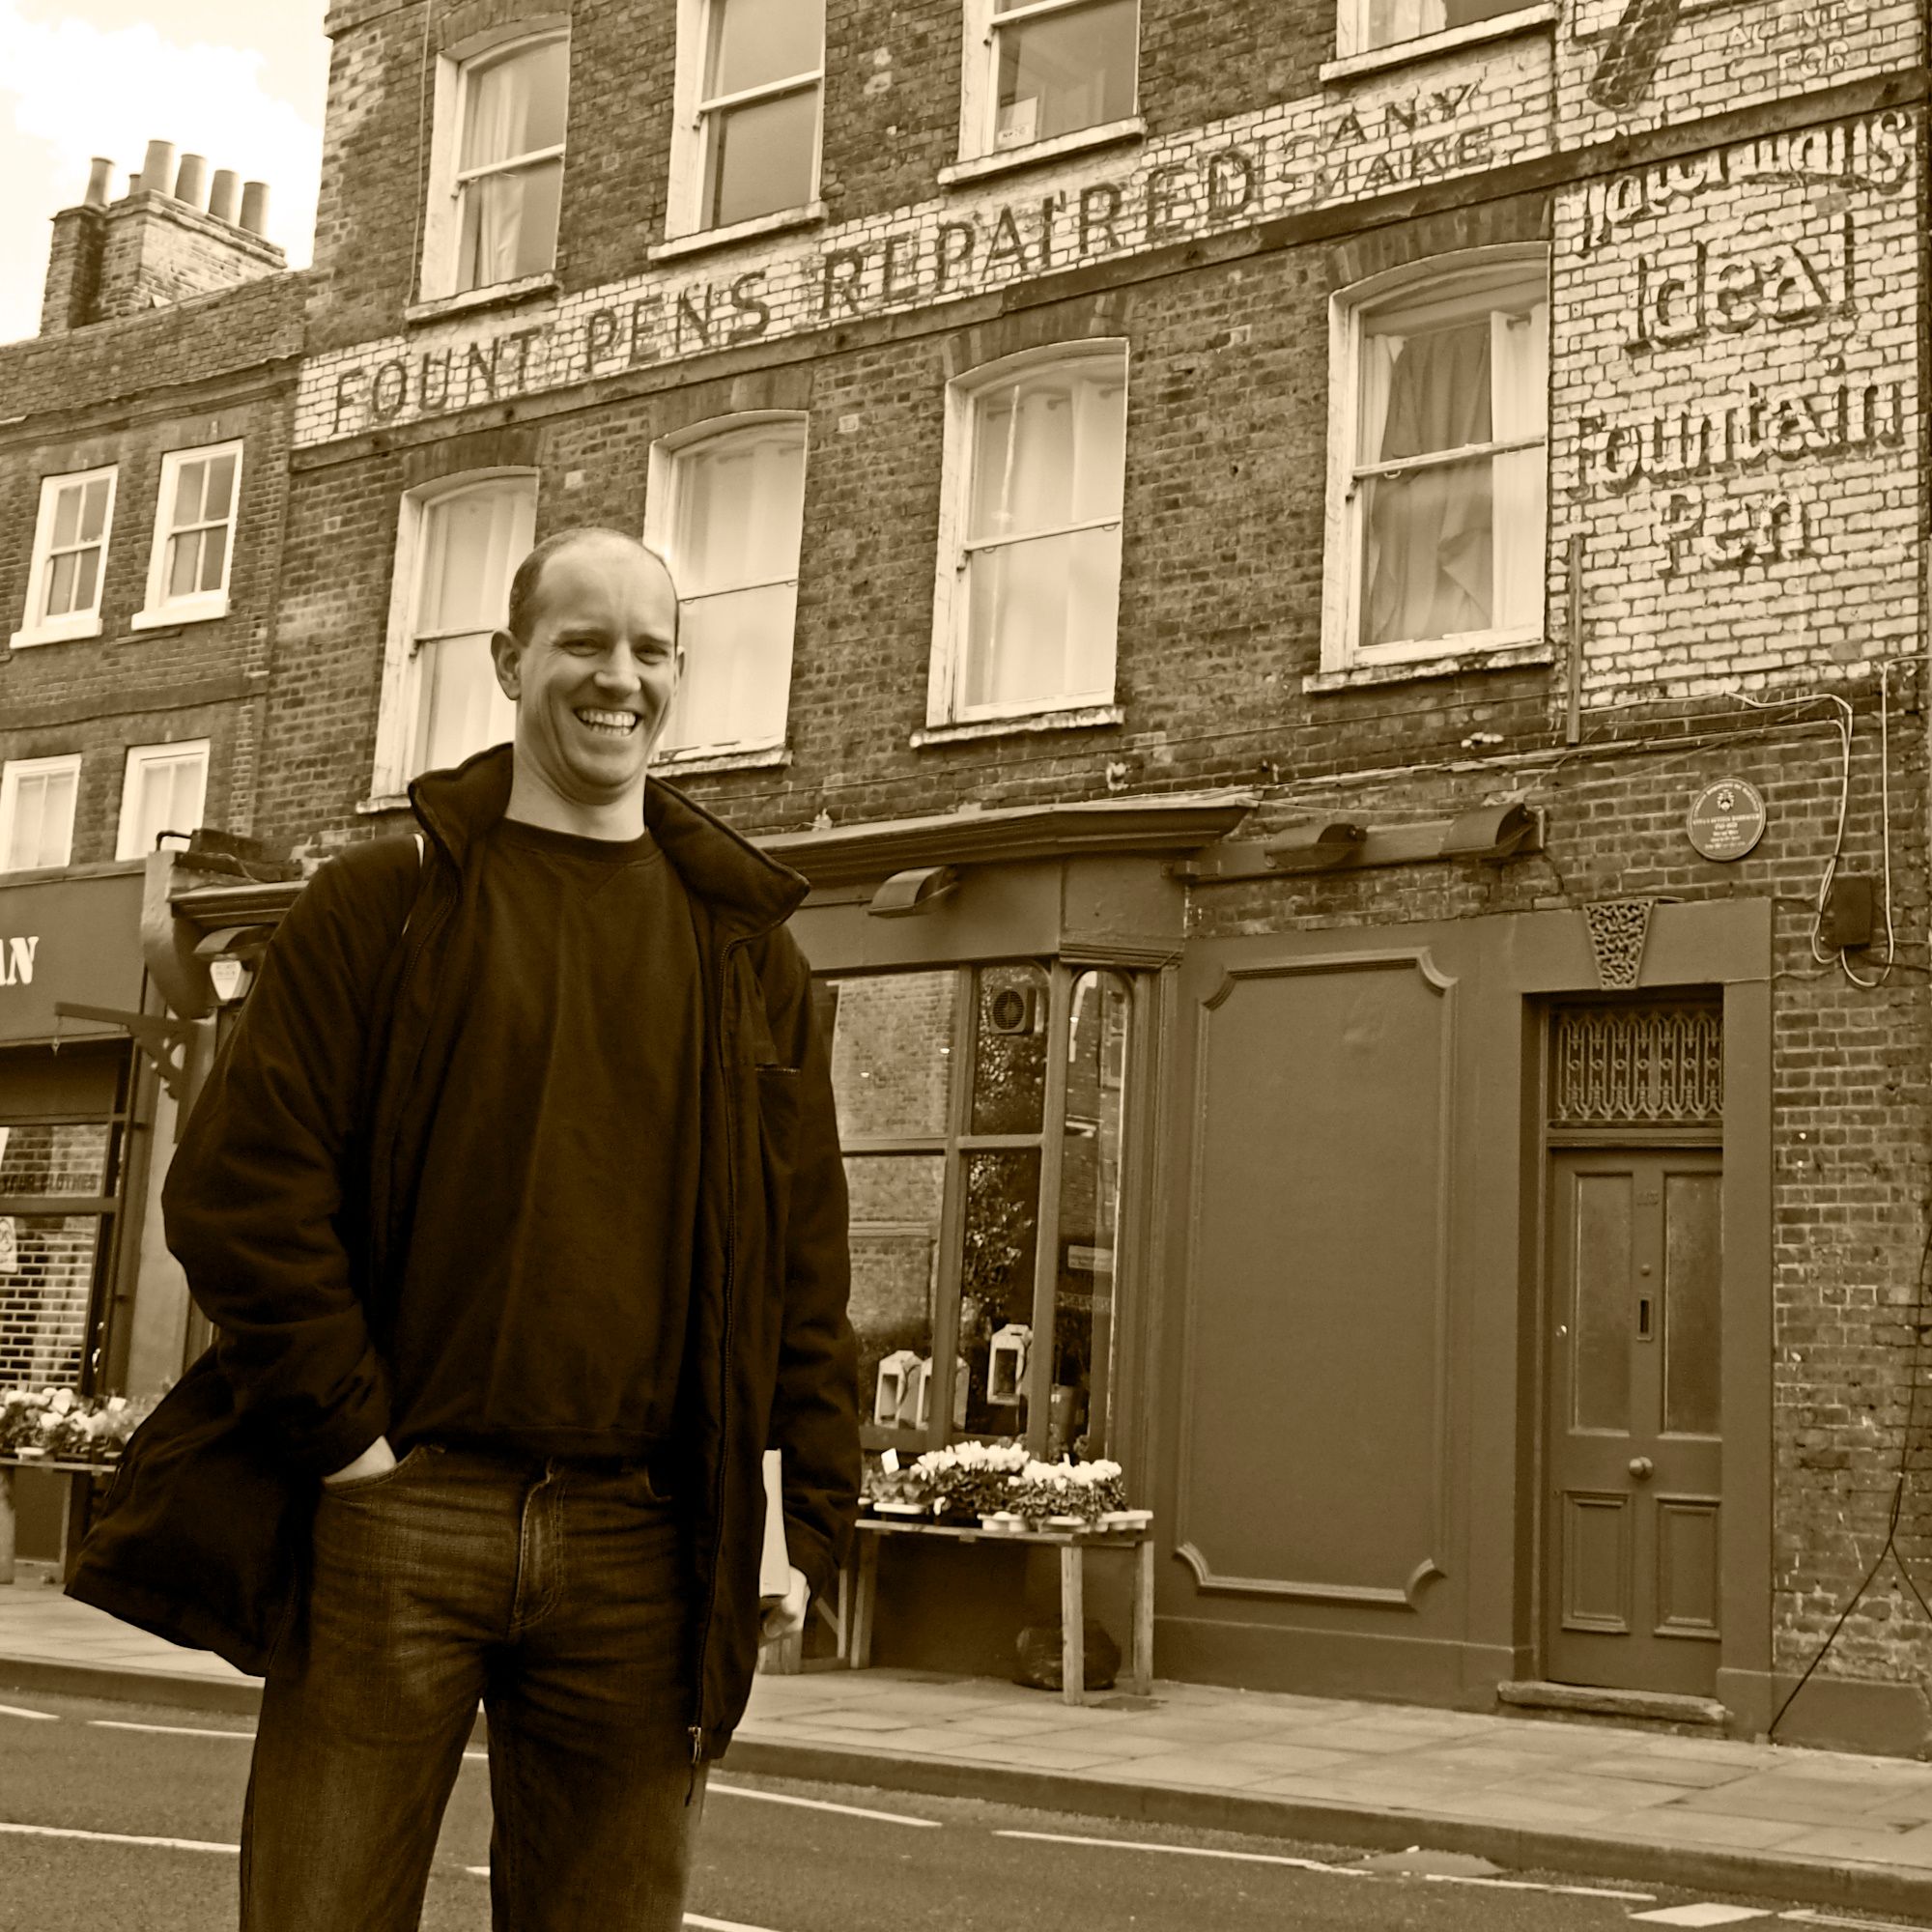 Sepia photo of a man smiling in front of a building with a hand-painted advertising sign on the brick.